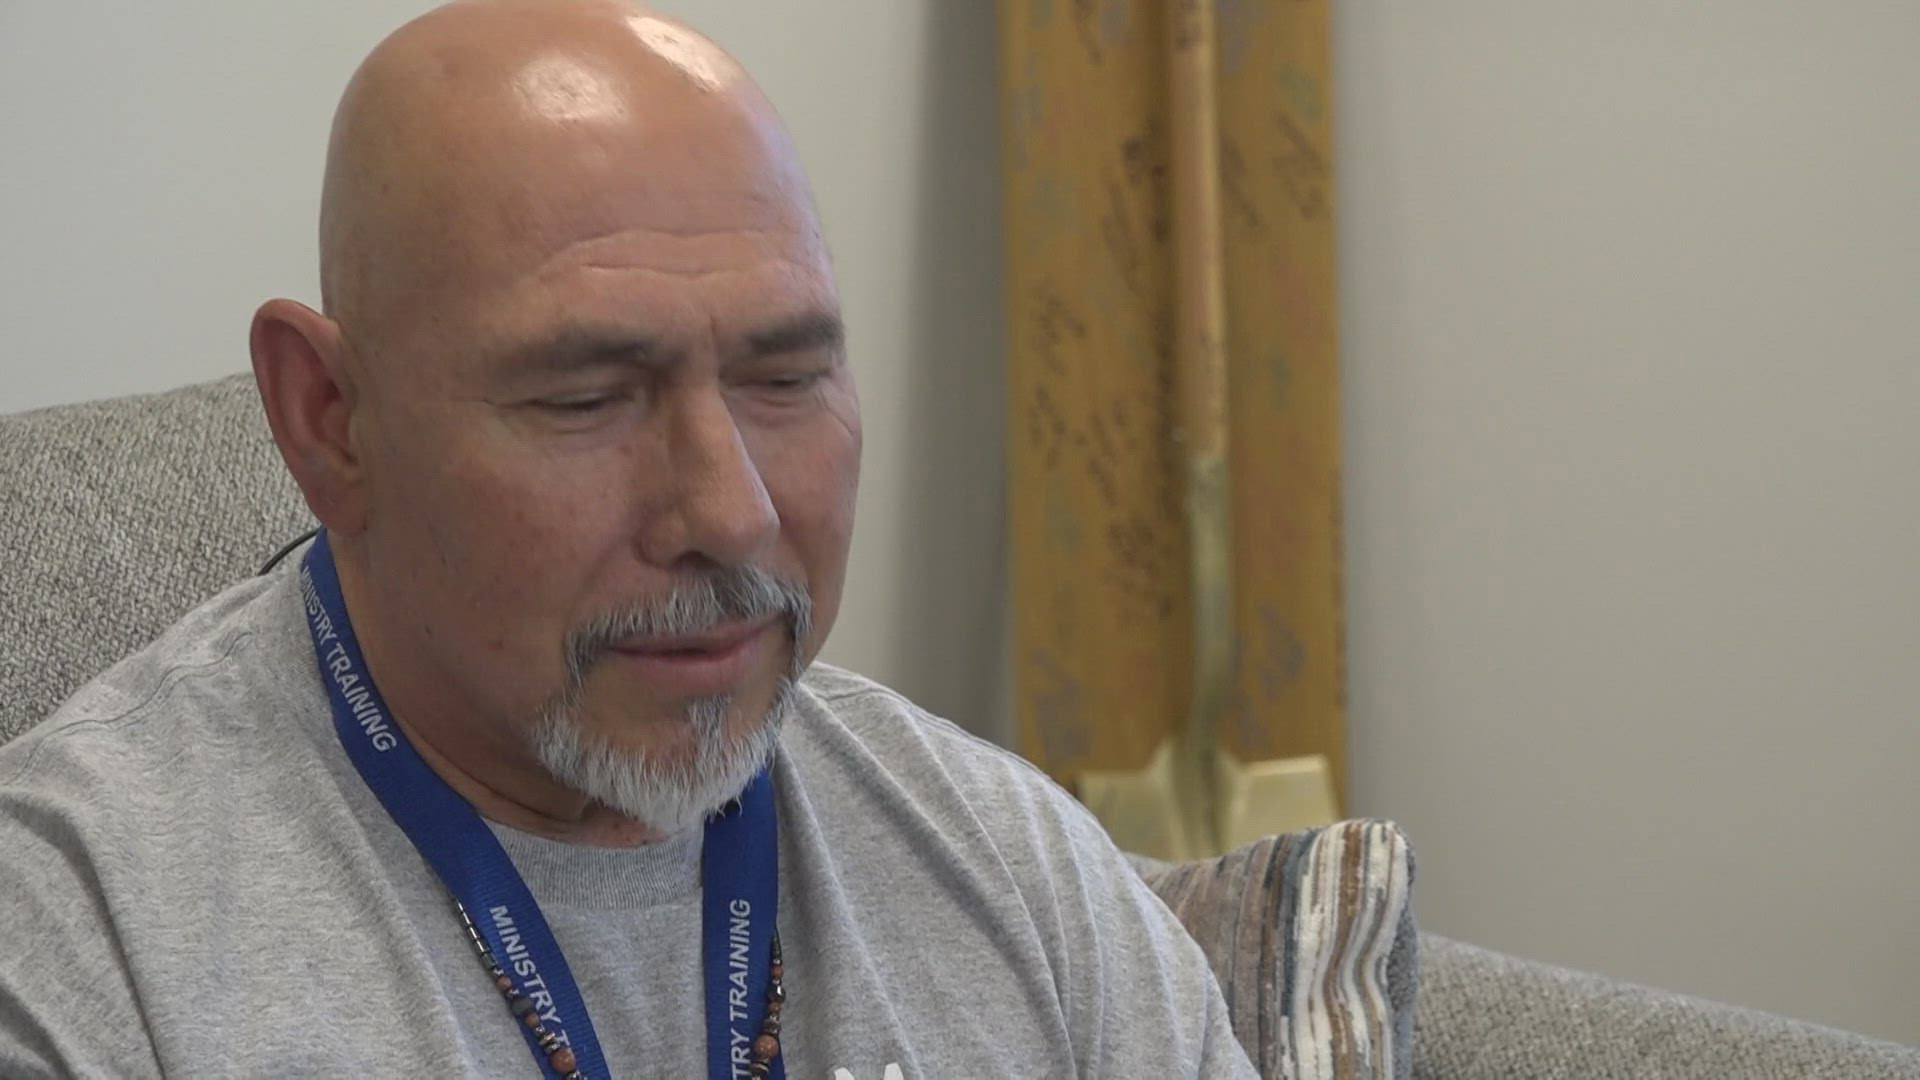 The father and son sat down with 12News to discuss their journey from homeless and drug-addicted to housed and faithful.